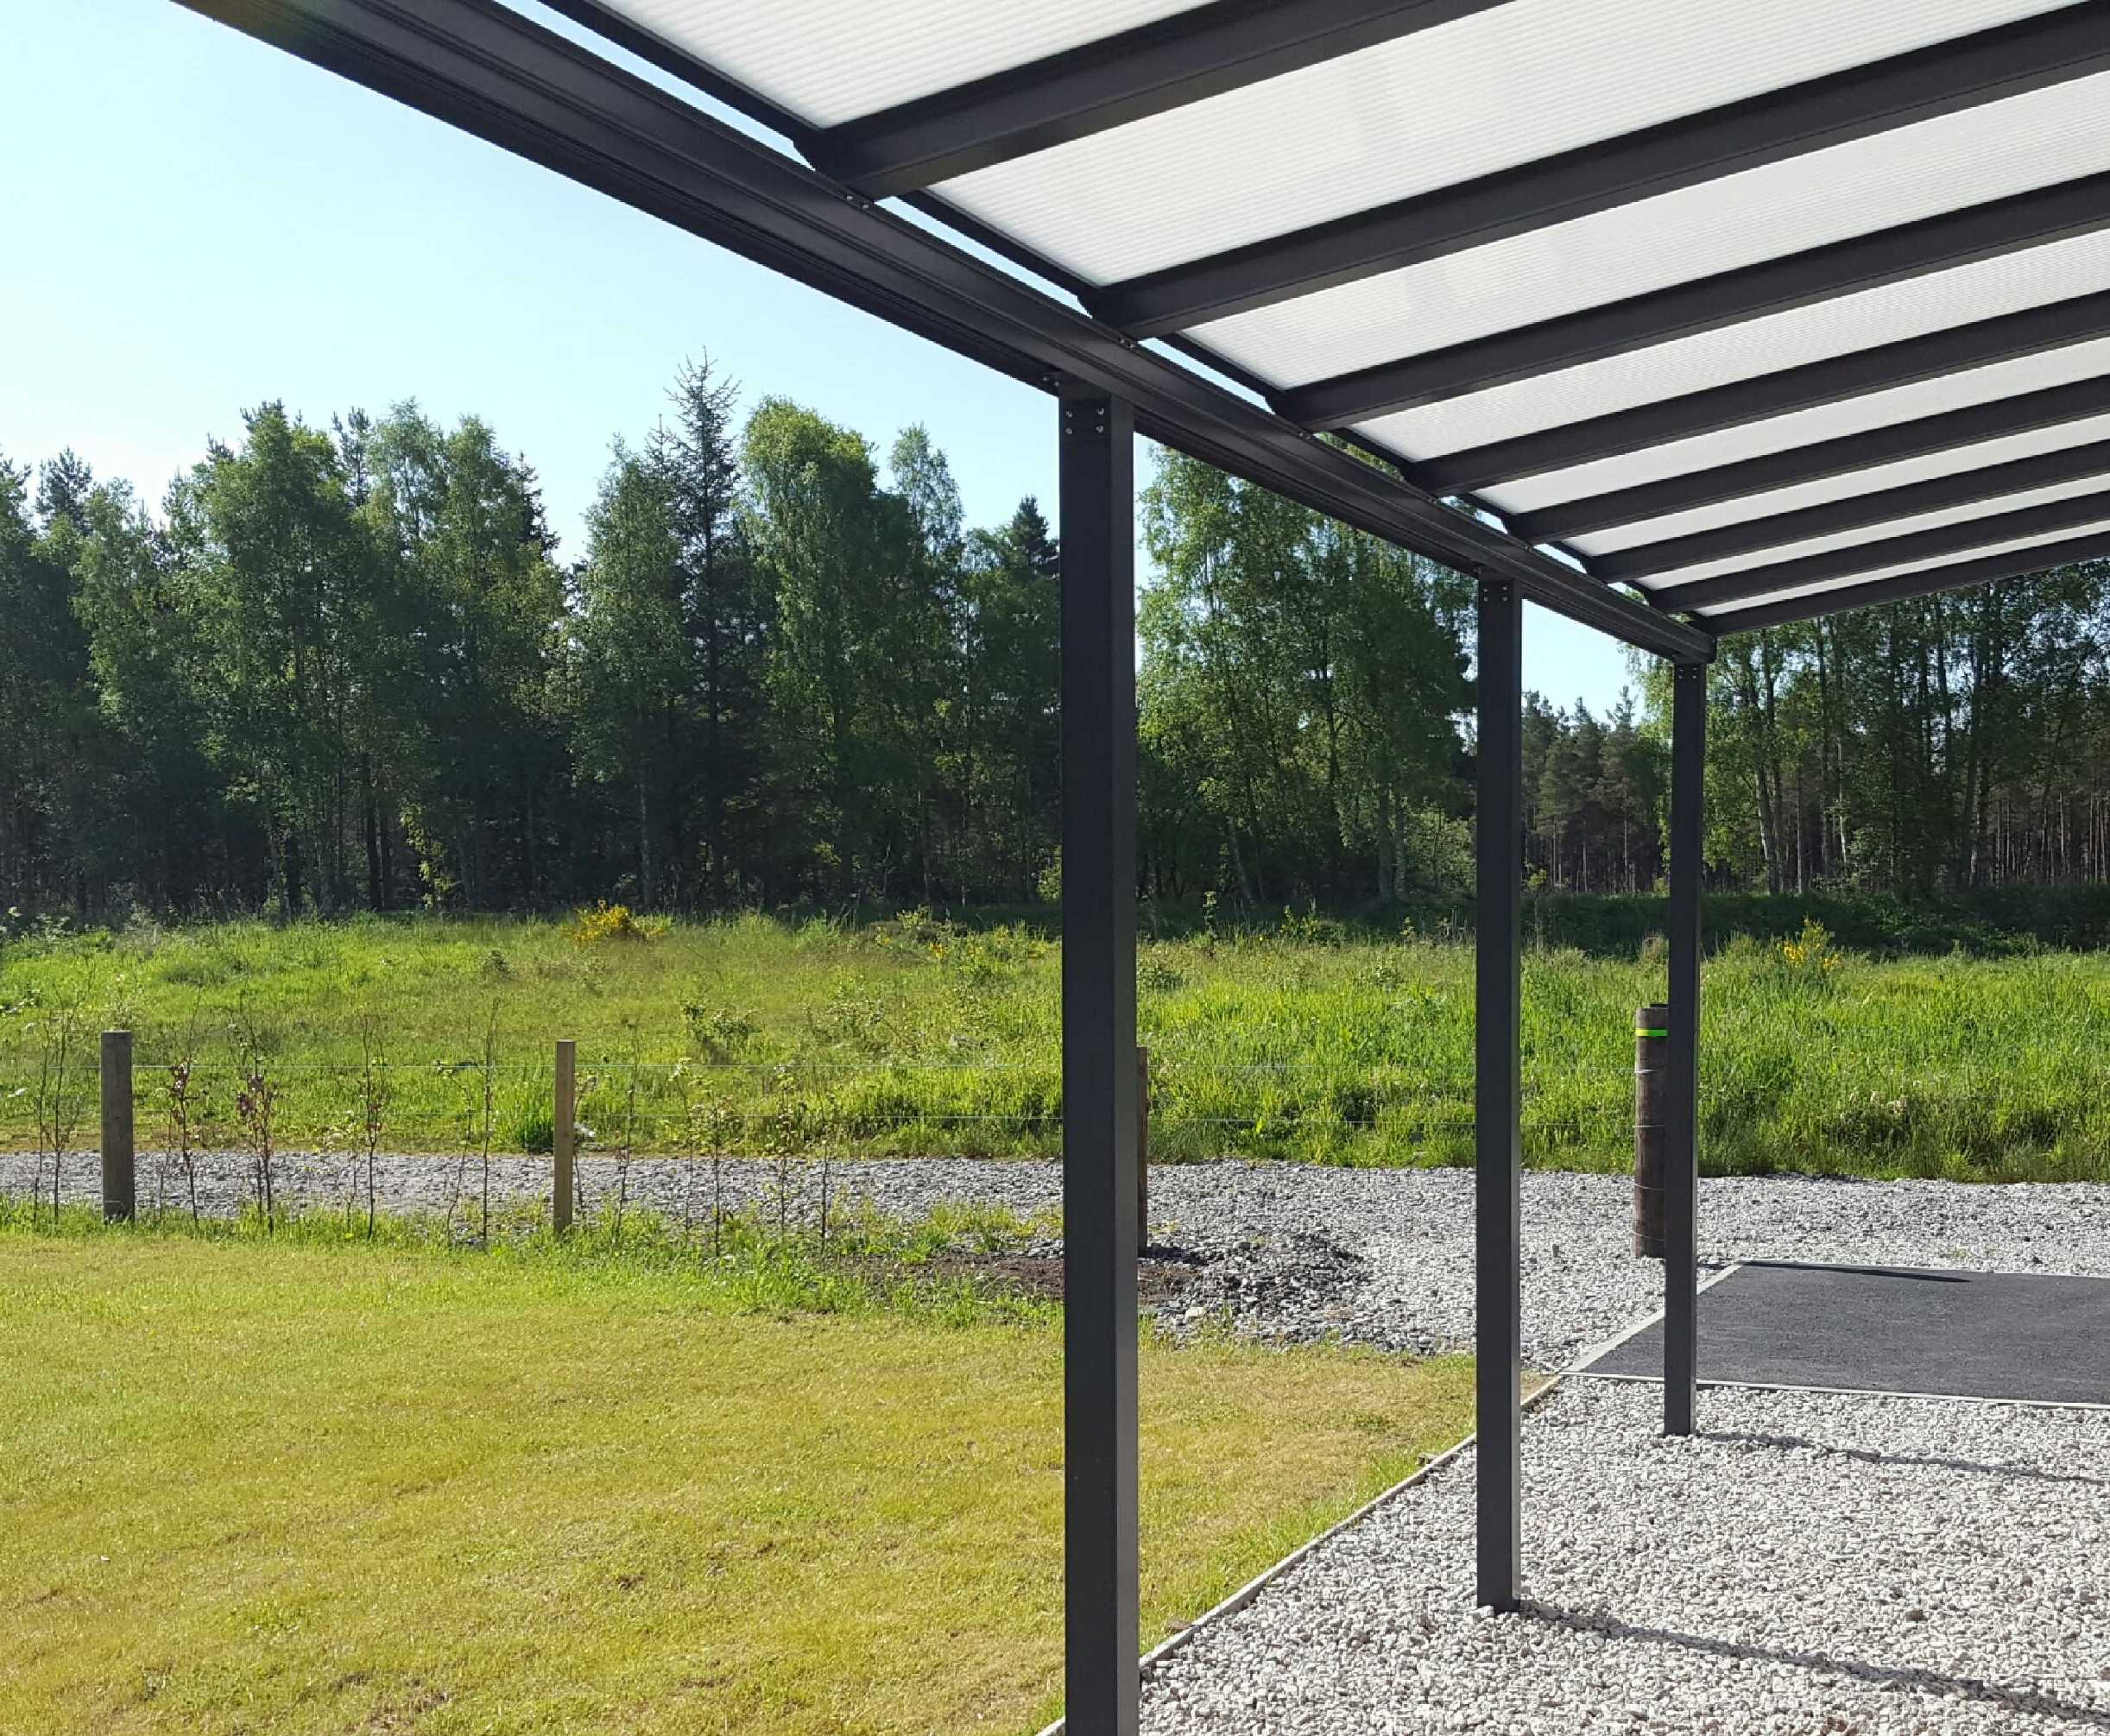 Omega Smart Lean-To Canopy, Anthracite Grey, 16mm Polycarbonate Glazing - 10.7m (W) x 4.5m (P), (5) Supporting Posts